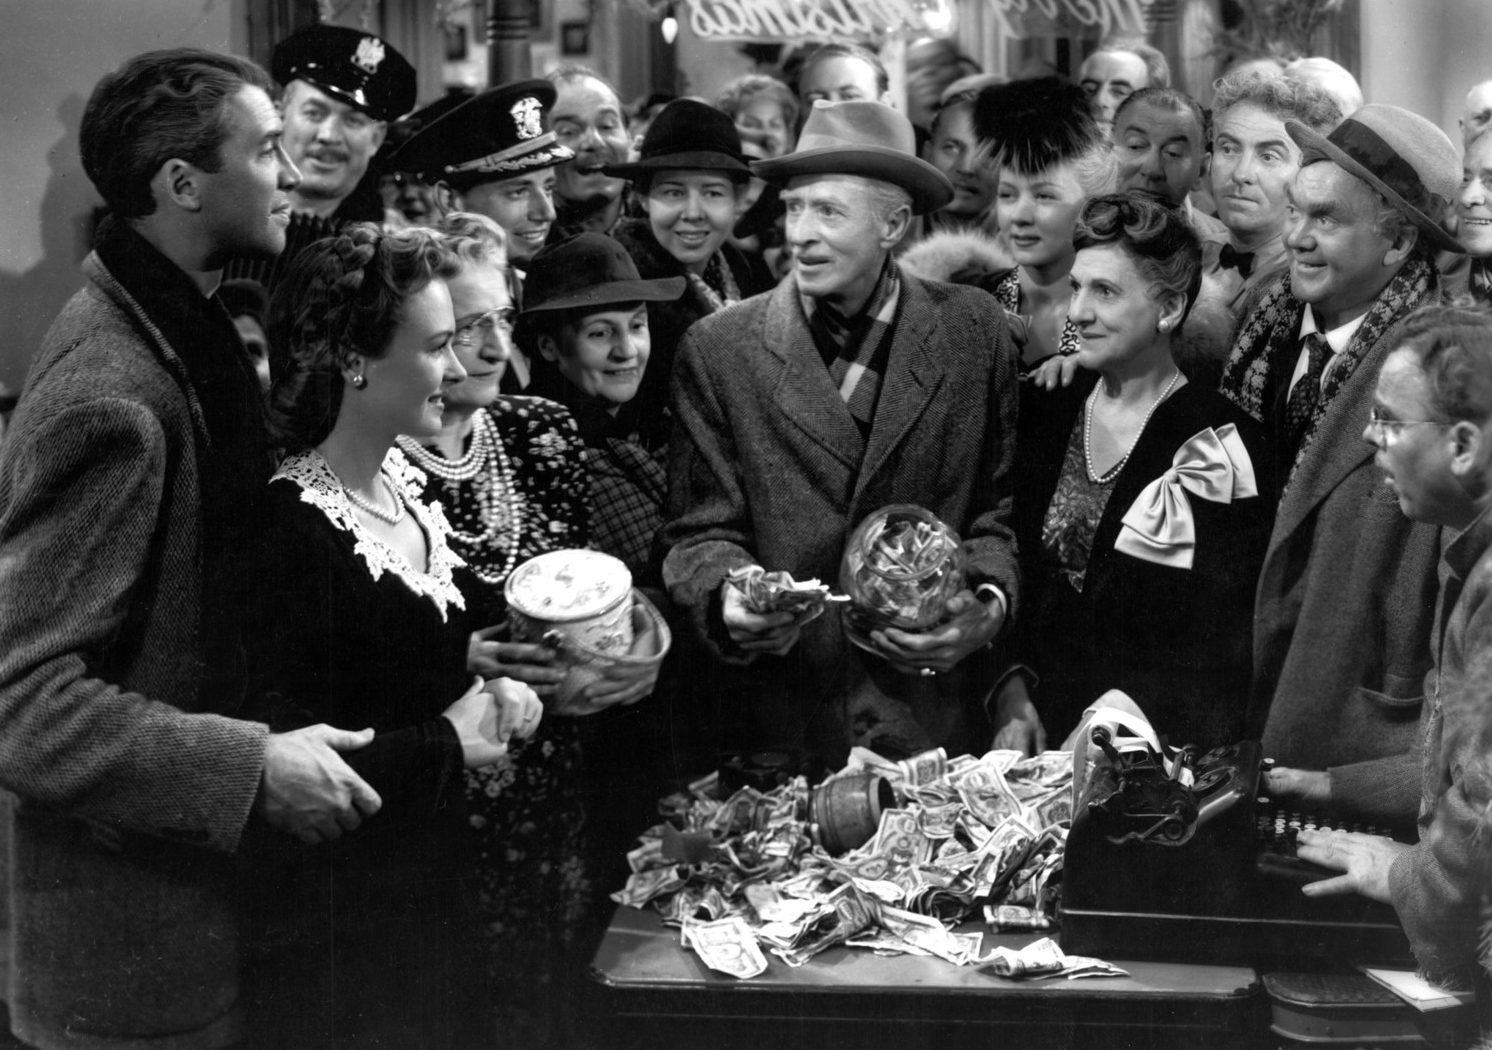 The scene in Its a Wonderful Life where the townspeople support George Bailey, played by James Stewart.